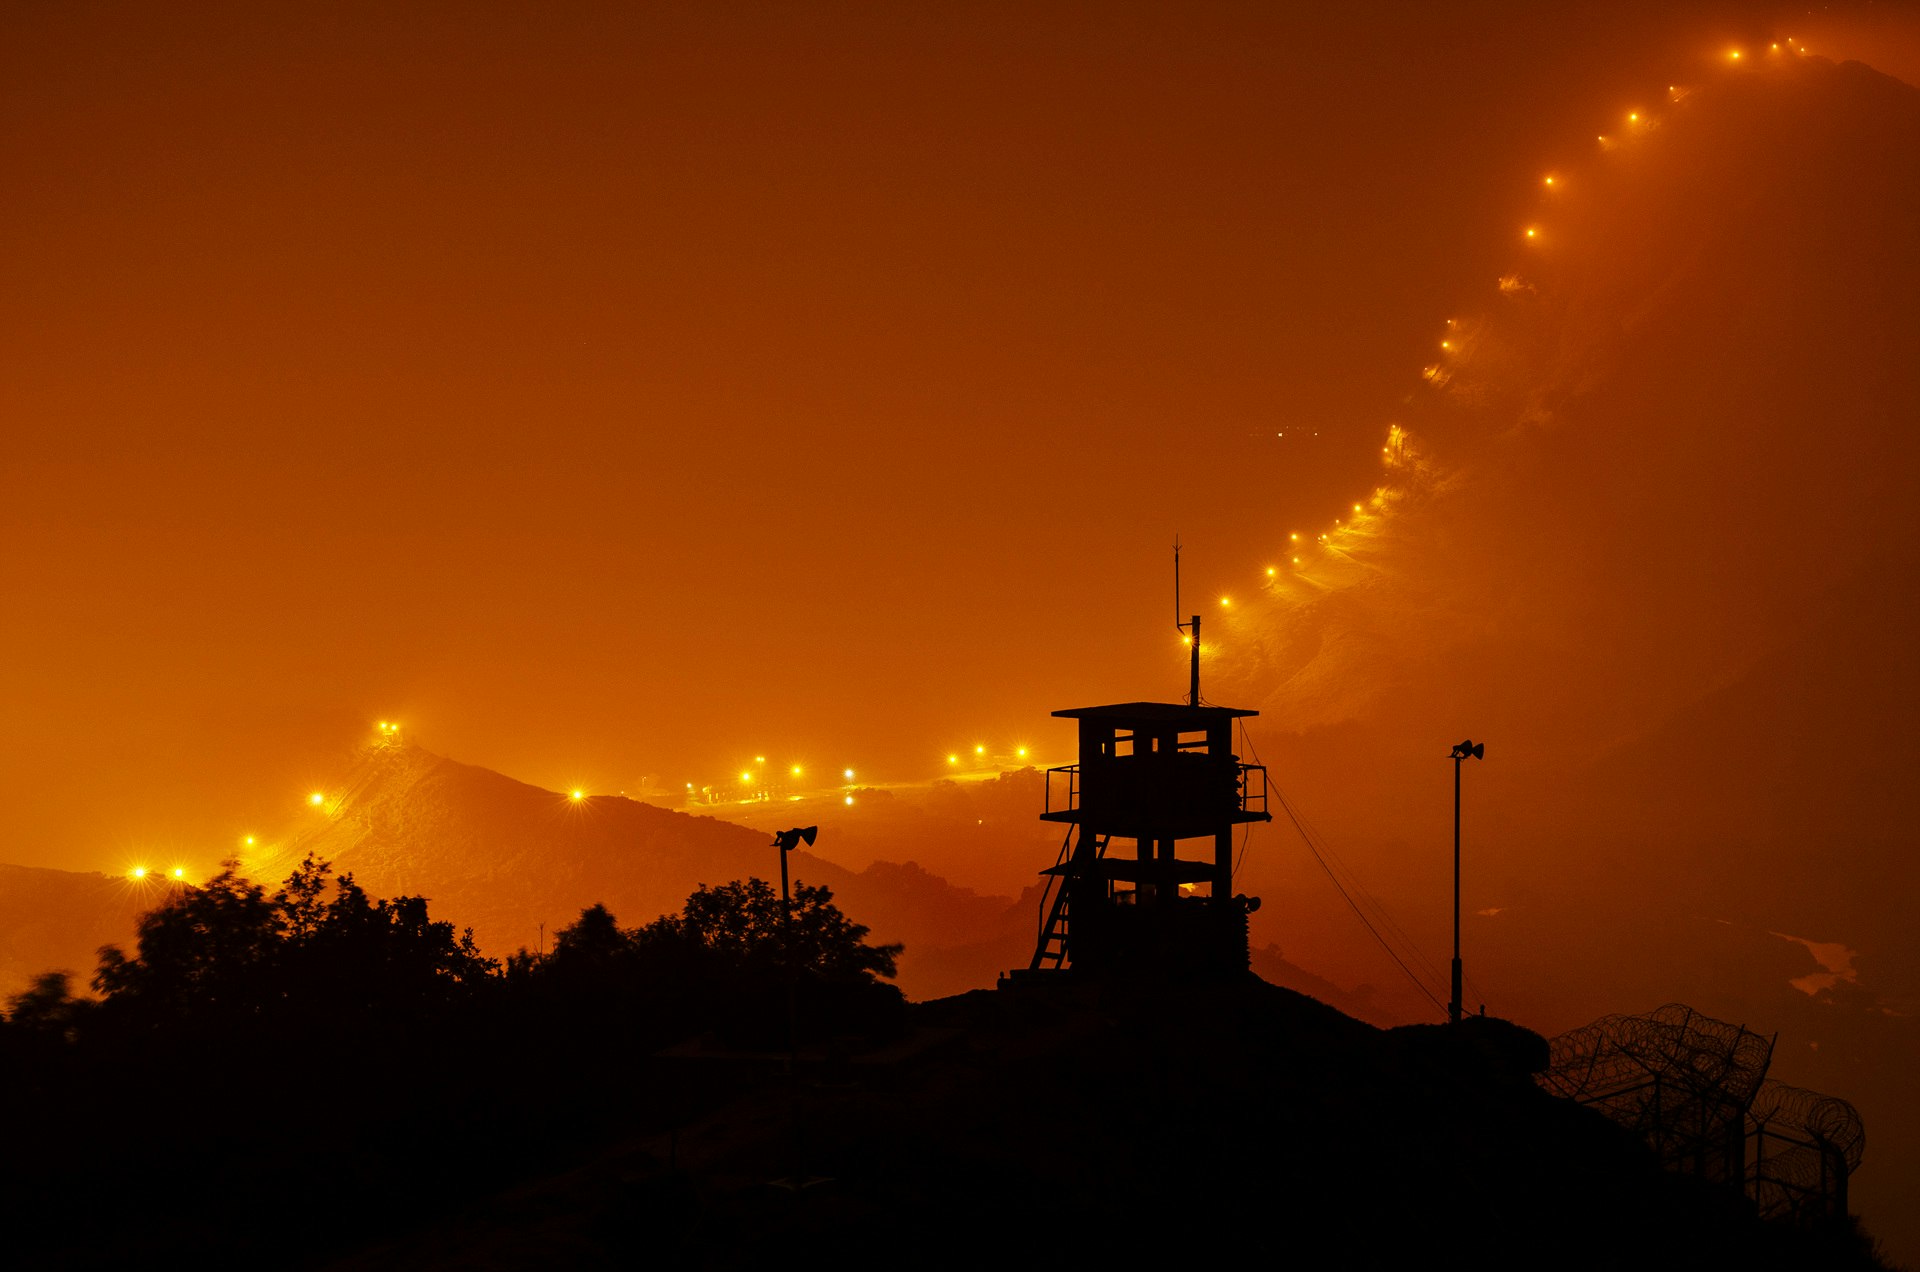 After sunset, countless lamps illuminating 248km of the DMZ fence to prevent enemy infiltration.